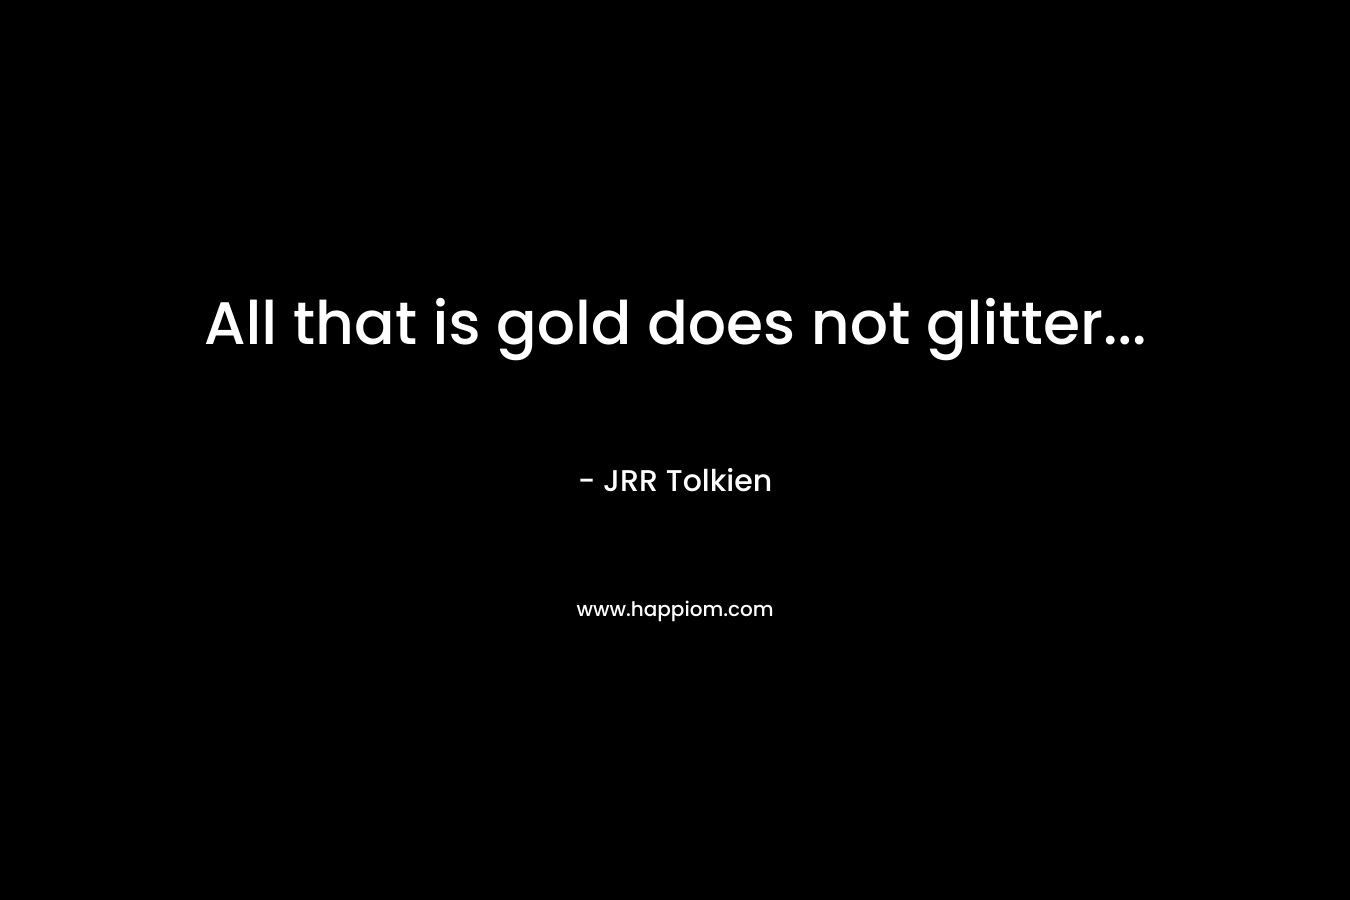 All that is gold does not glitter...